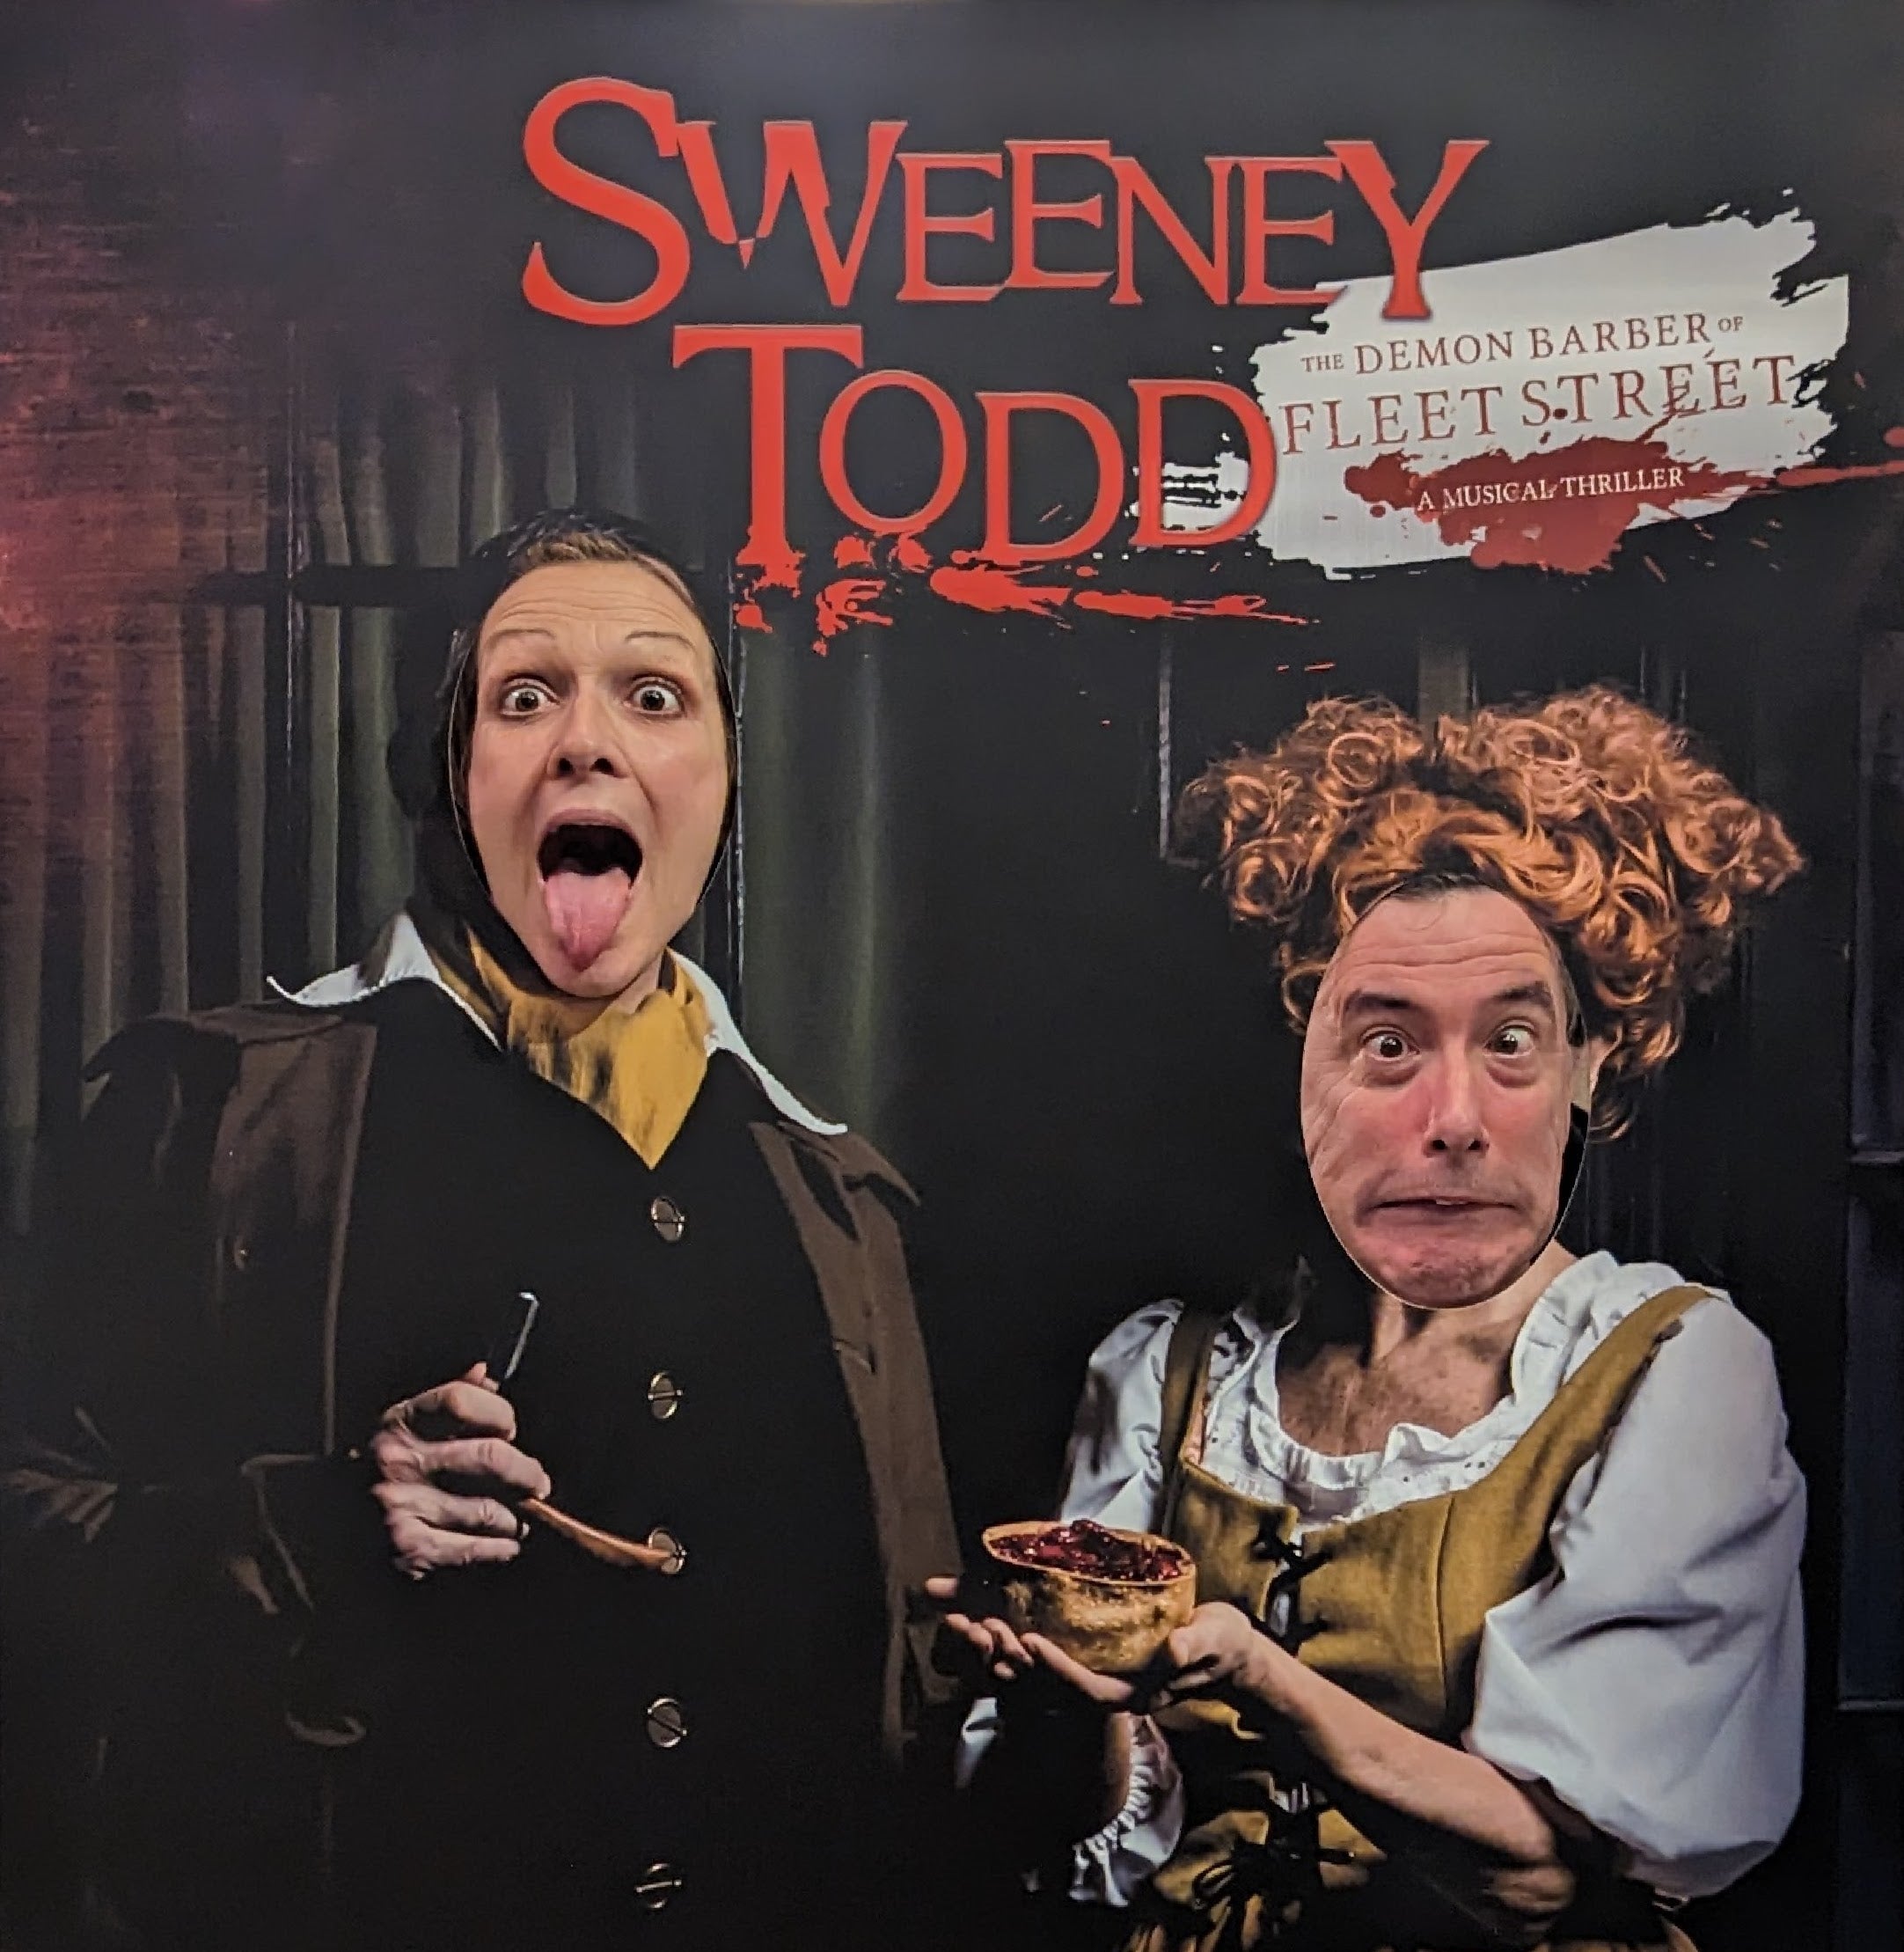 Cast members putting their faces in the holes of sweeney todd board